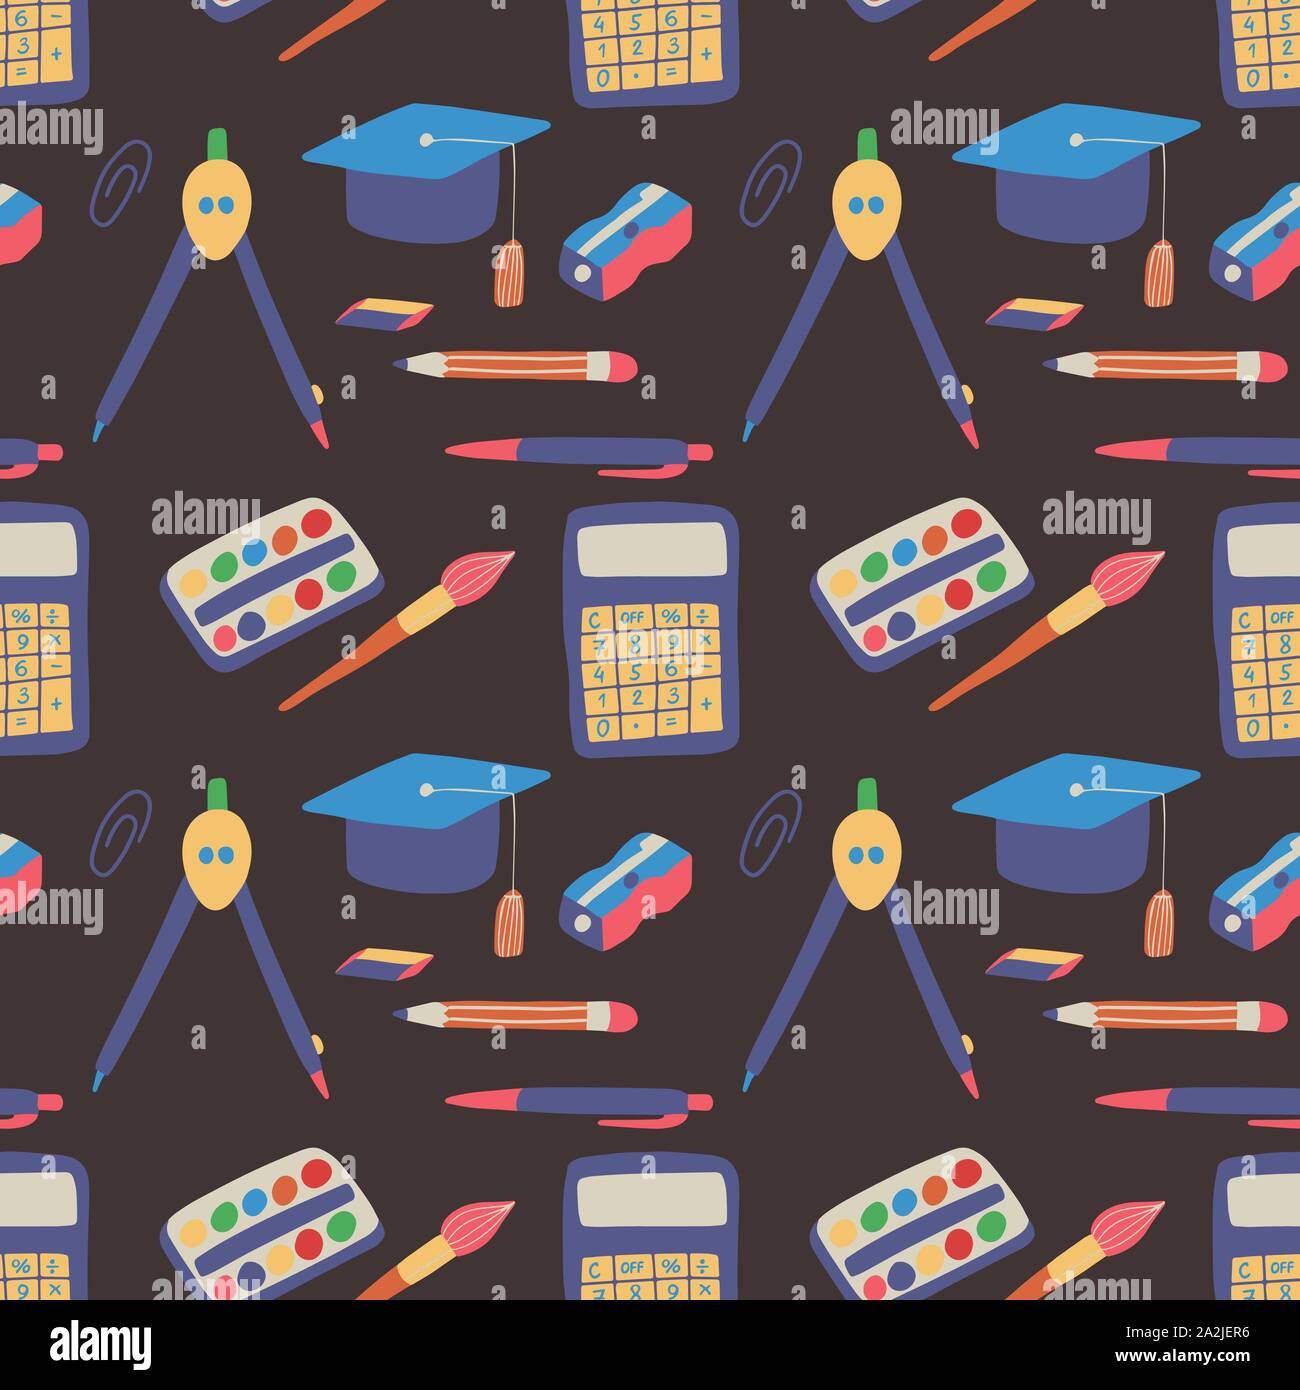 Seamless pattern back to school with hand drawn graphic elements. Learning, education backdrop. Wallpaper background. Colorful background vector. Stock Vector